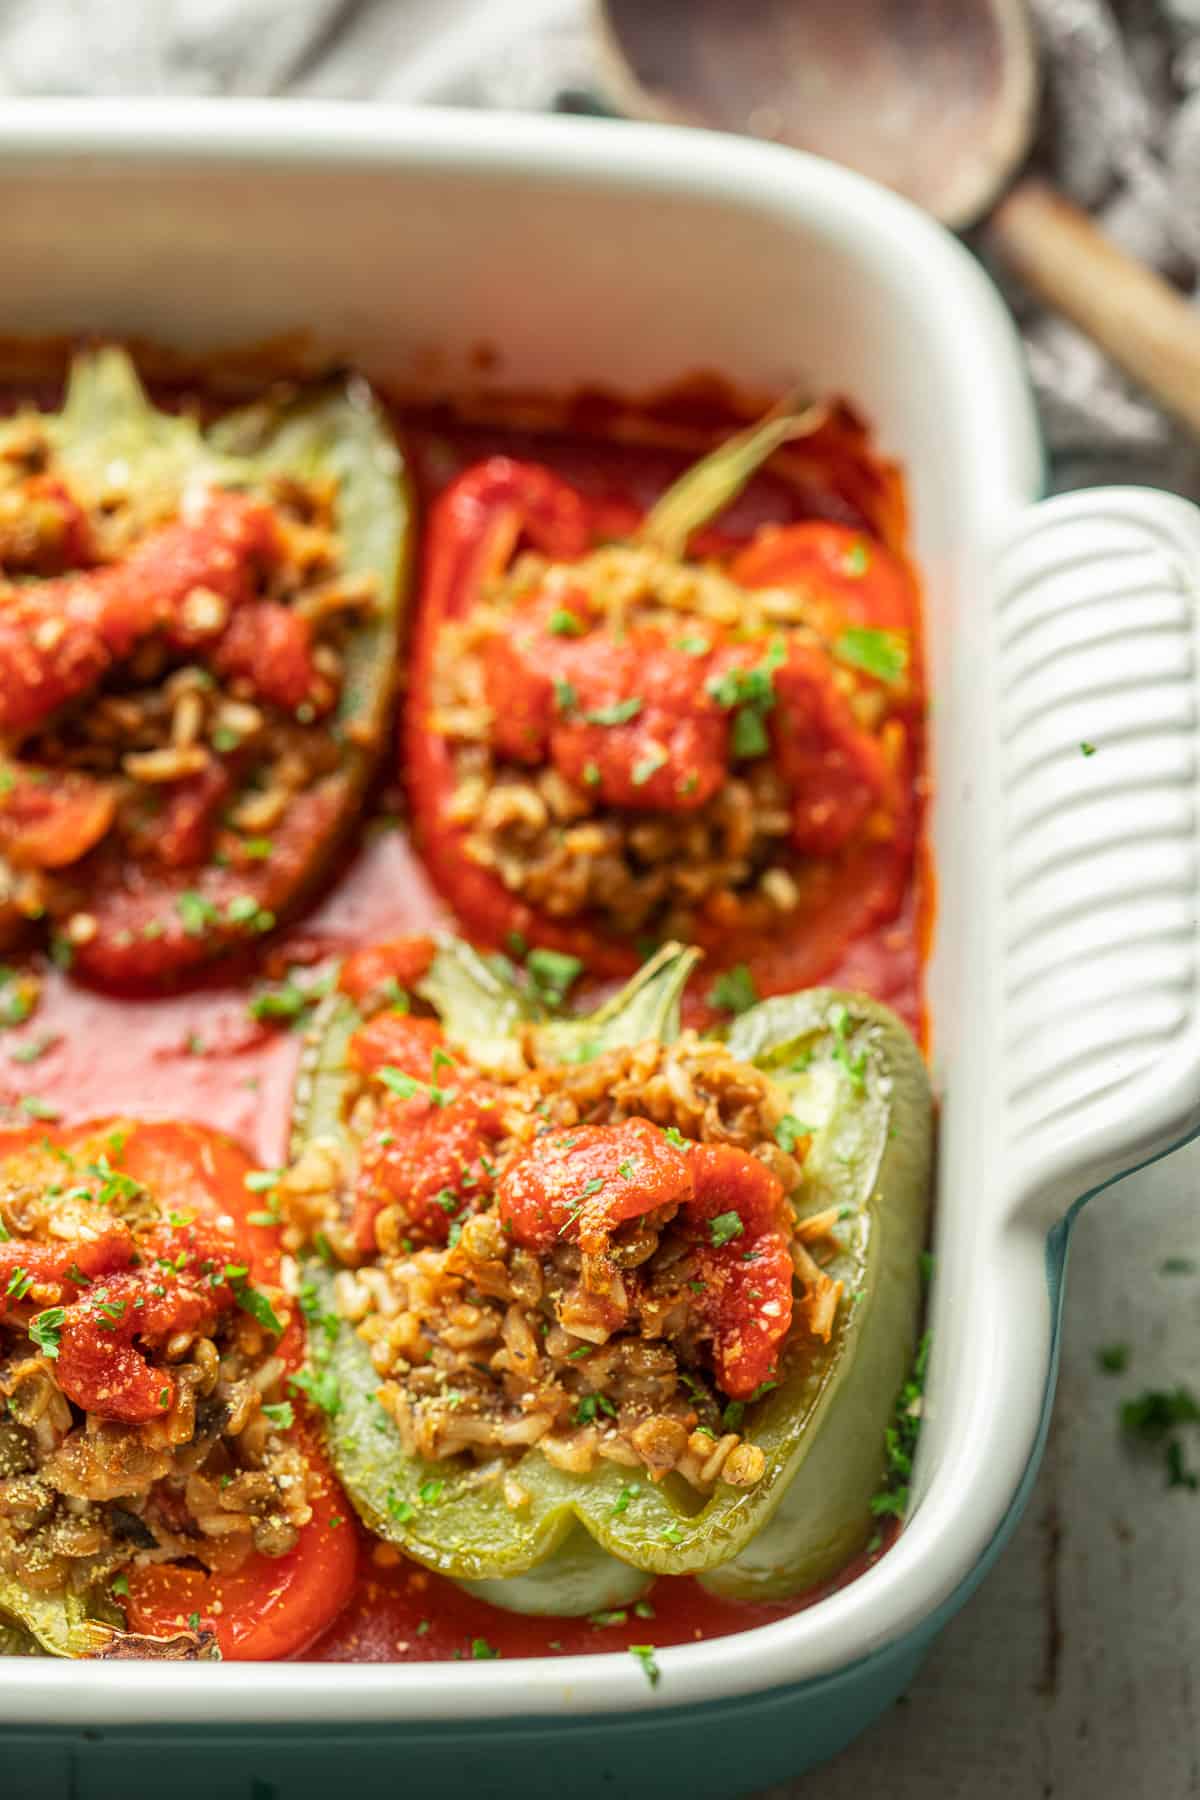 Vegan Stuffed Peppers in a baking dish with tomato sauce and vegan Parmesan cheese.